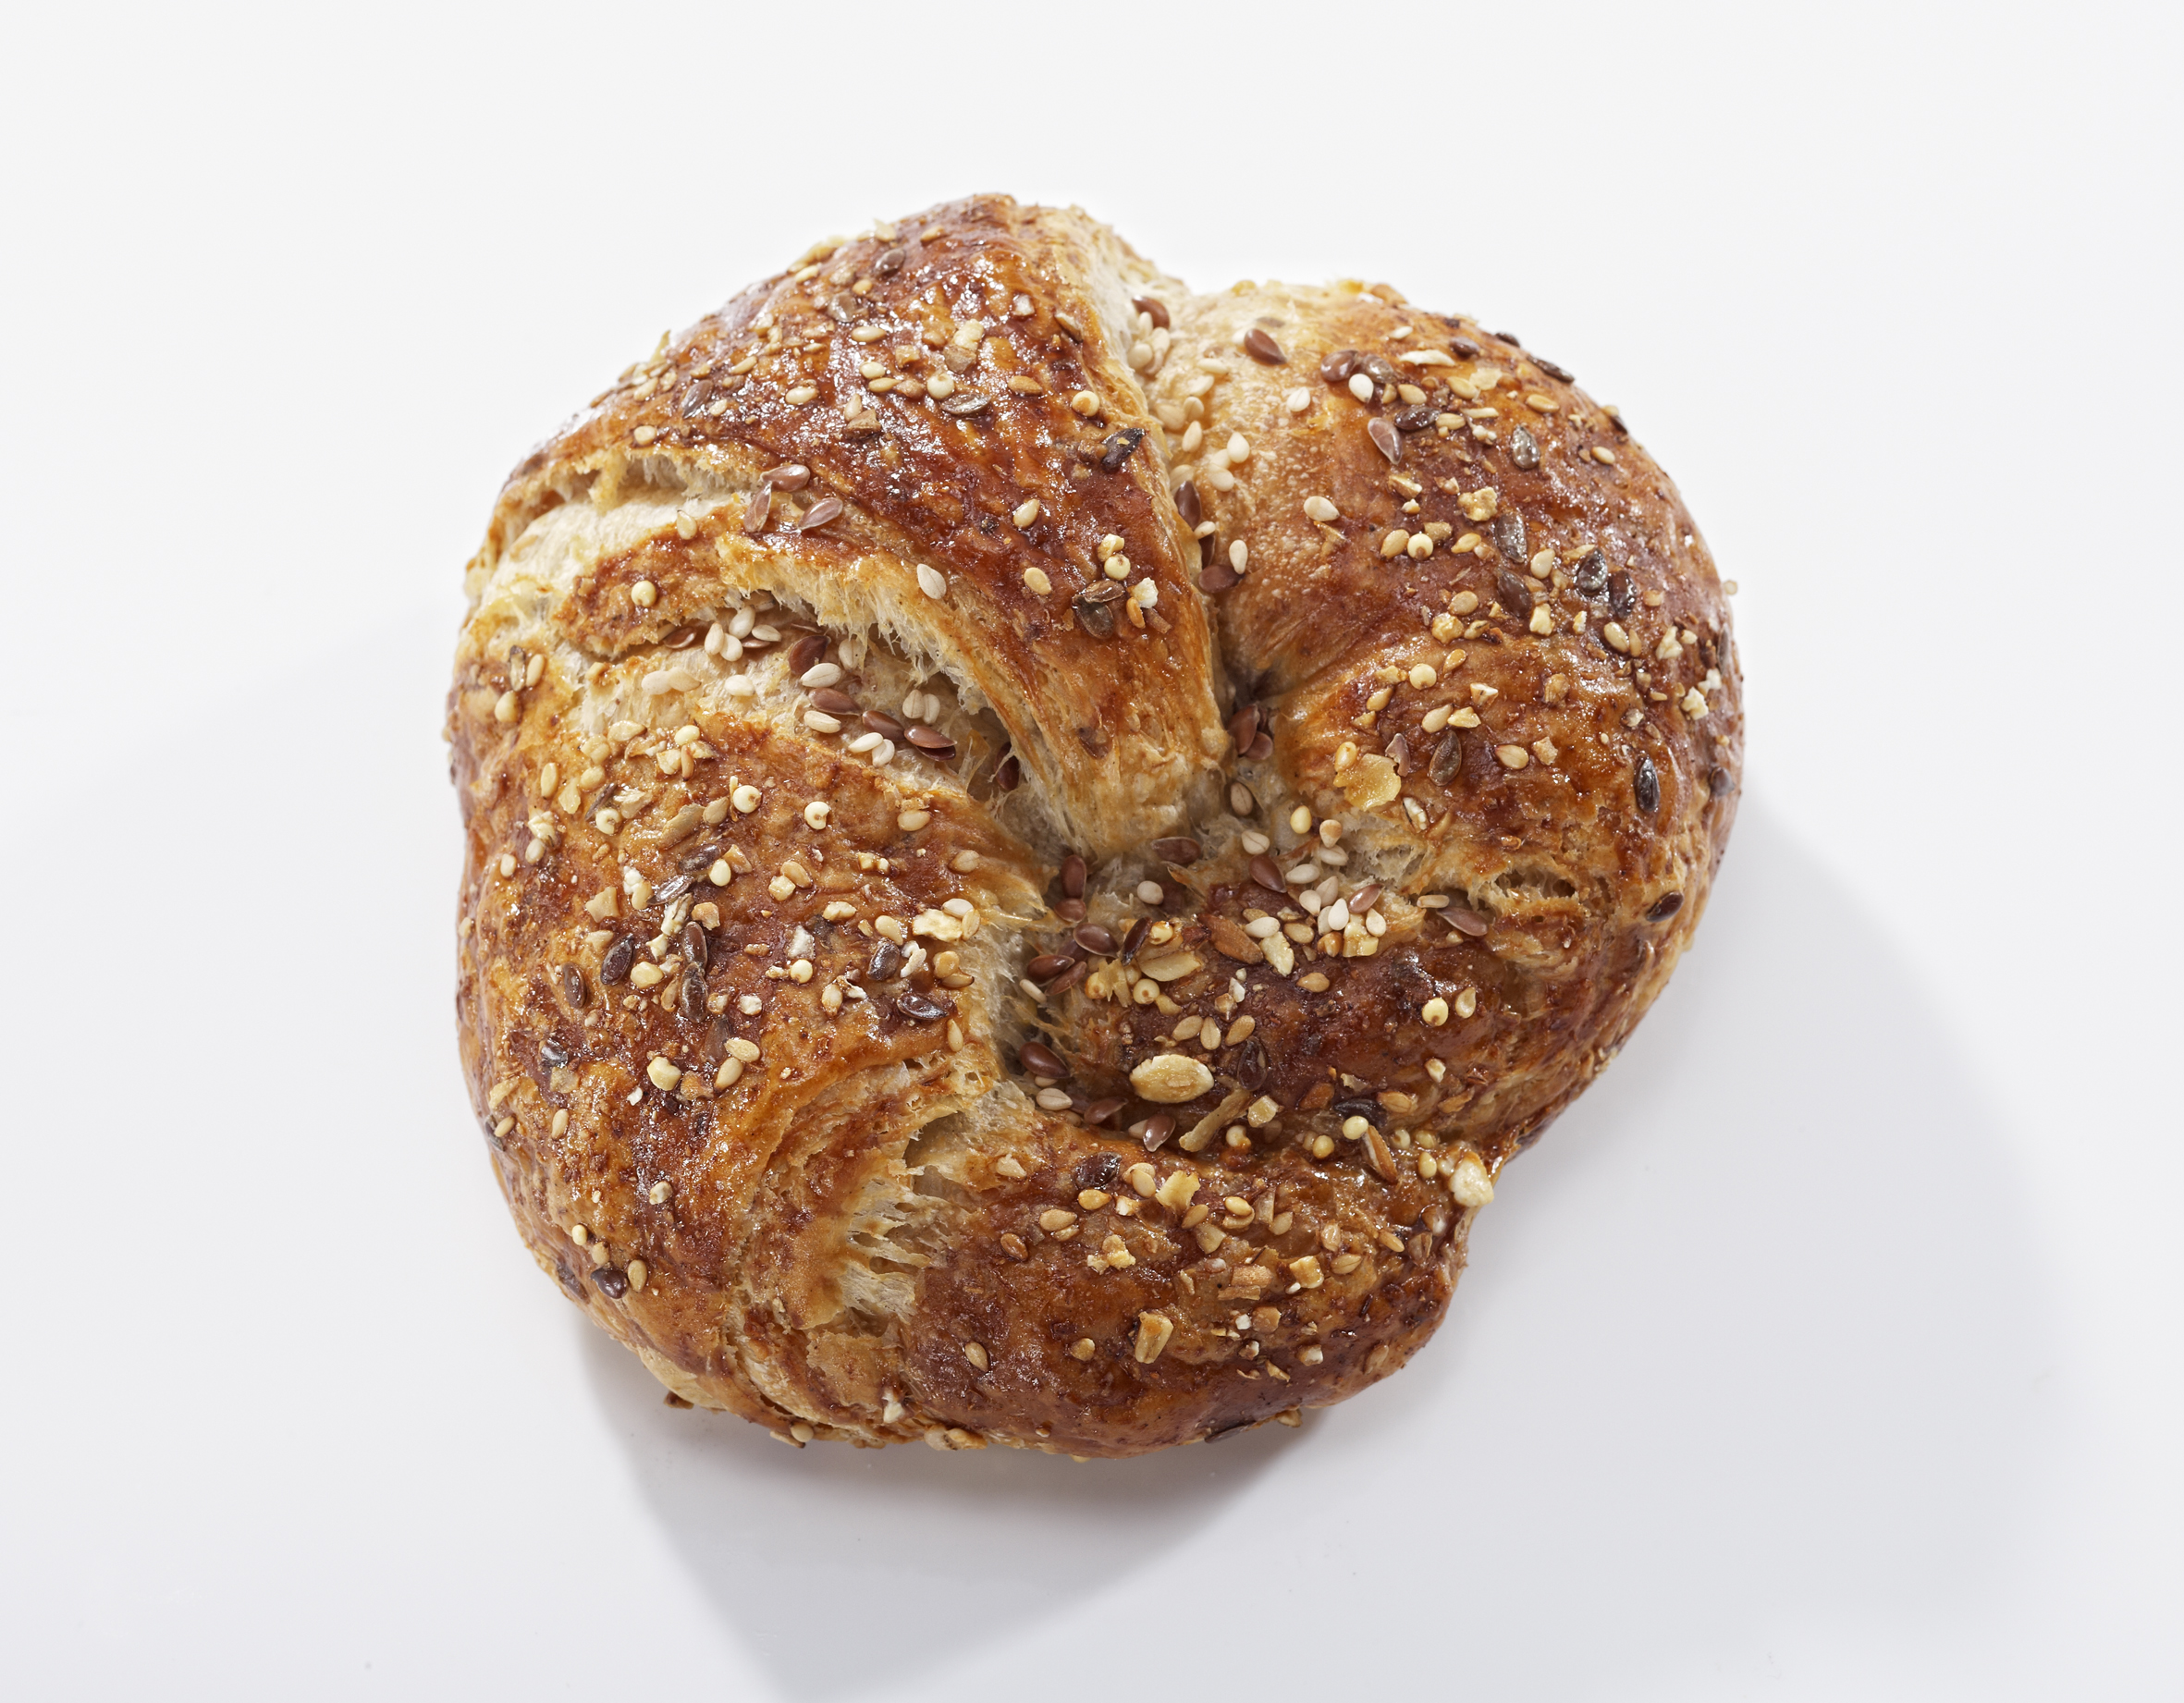 MG curved croissant 52385.jpg